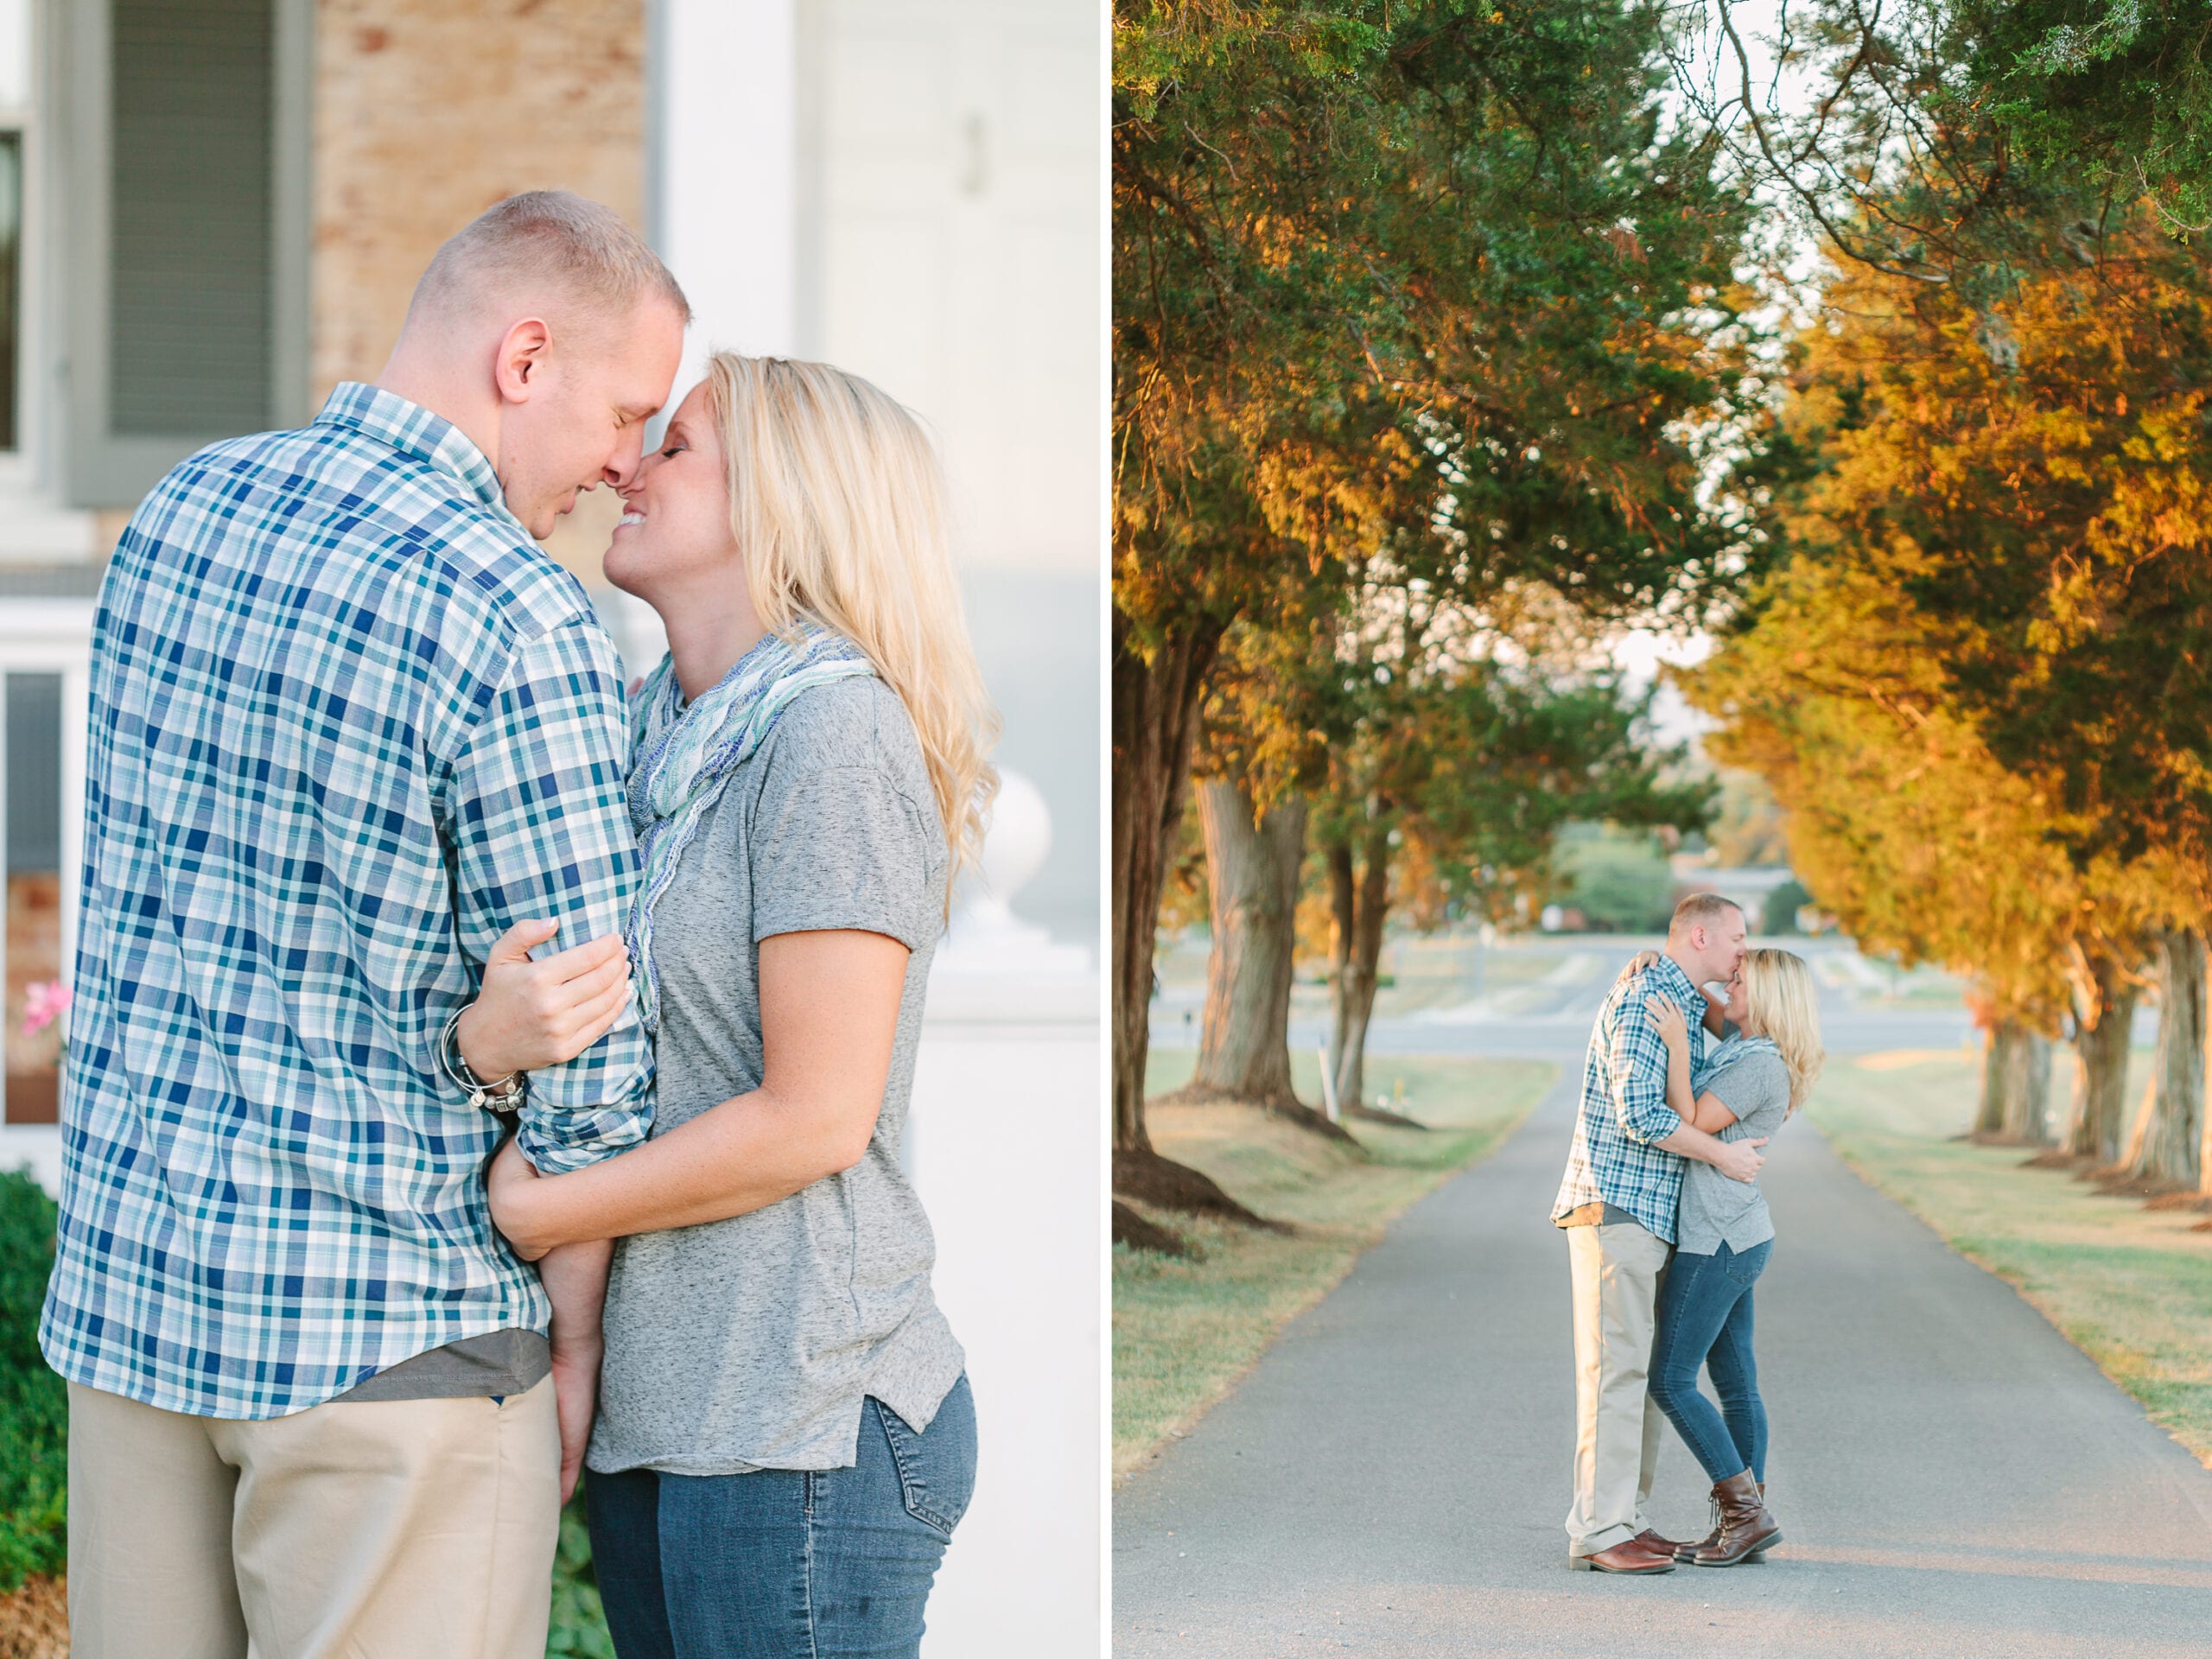 Fall Engagement Portraits at Walker's Overlook. Photography by Lauren Myers Photography #WalkersOverlook #Engagement #Fall